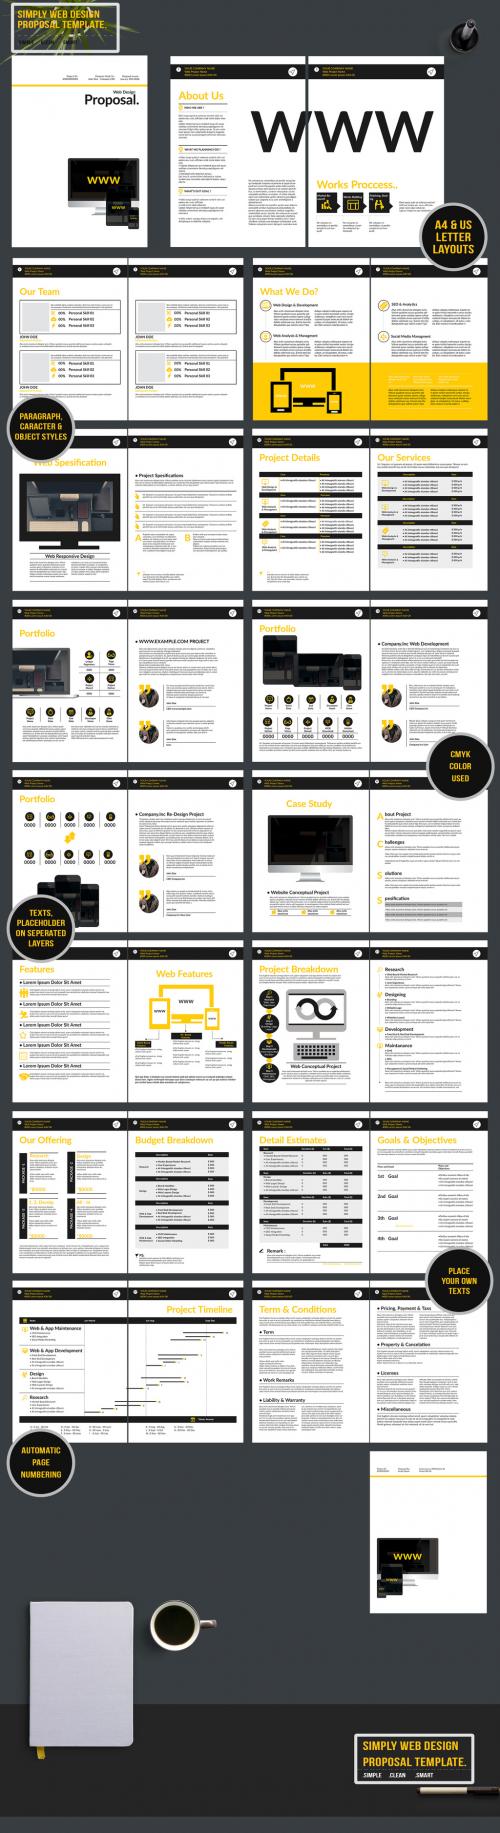 Adobe Stock - Website Design Proposal Layout with Yellow Accents - 199989500